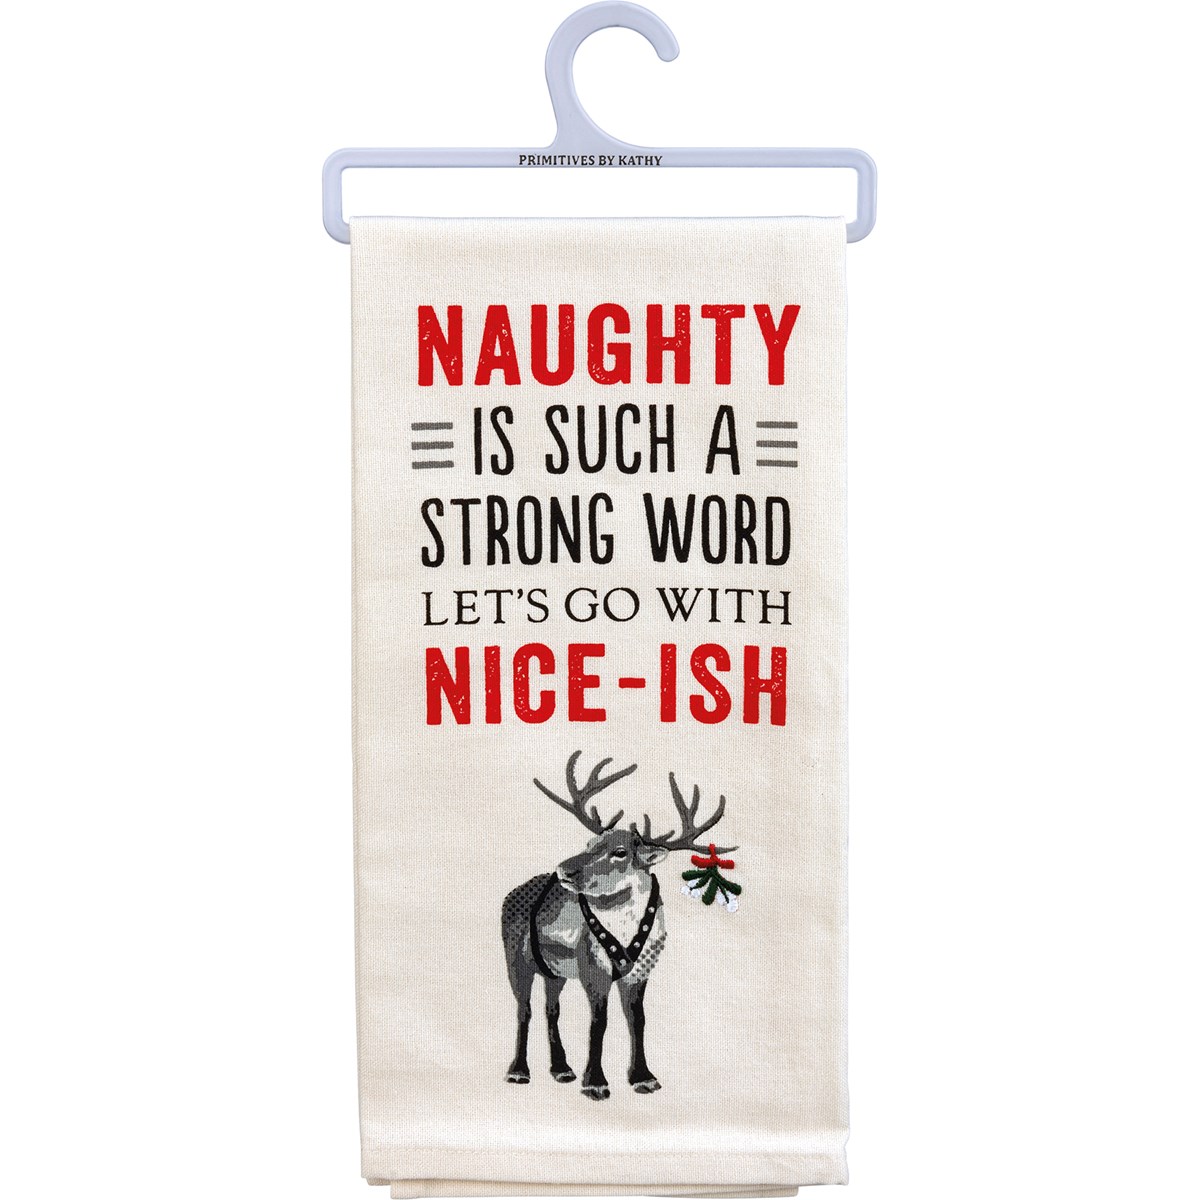 Naughty Let's Go With Niceish Kitchen Towel - Cotton